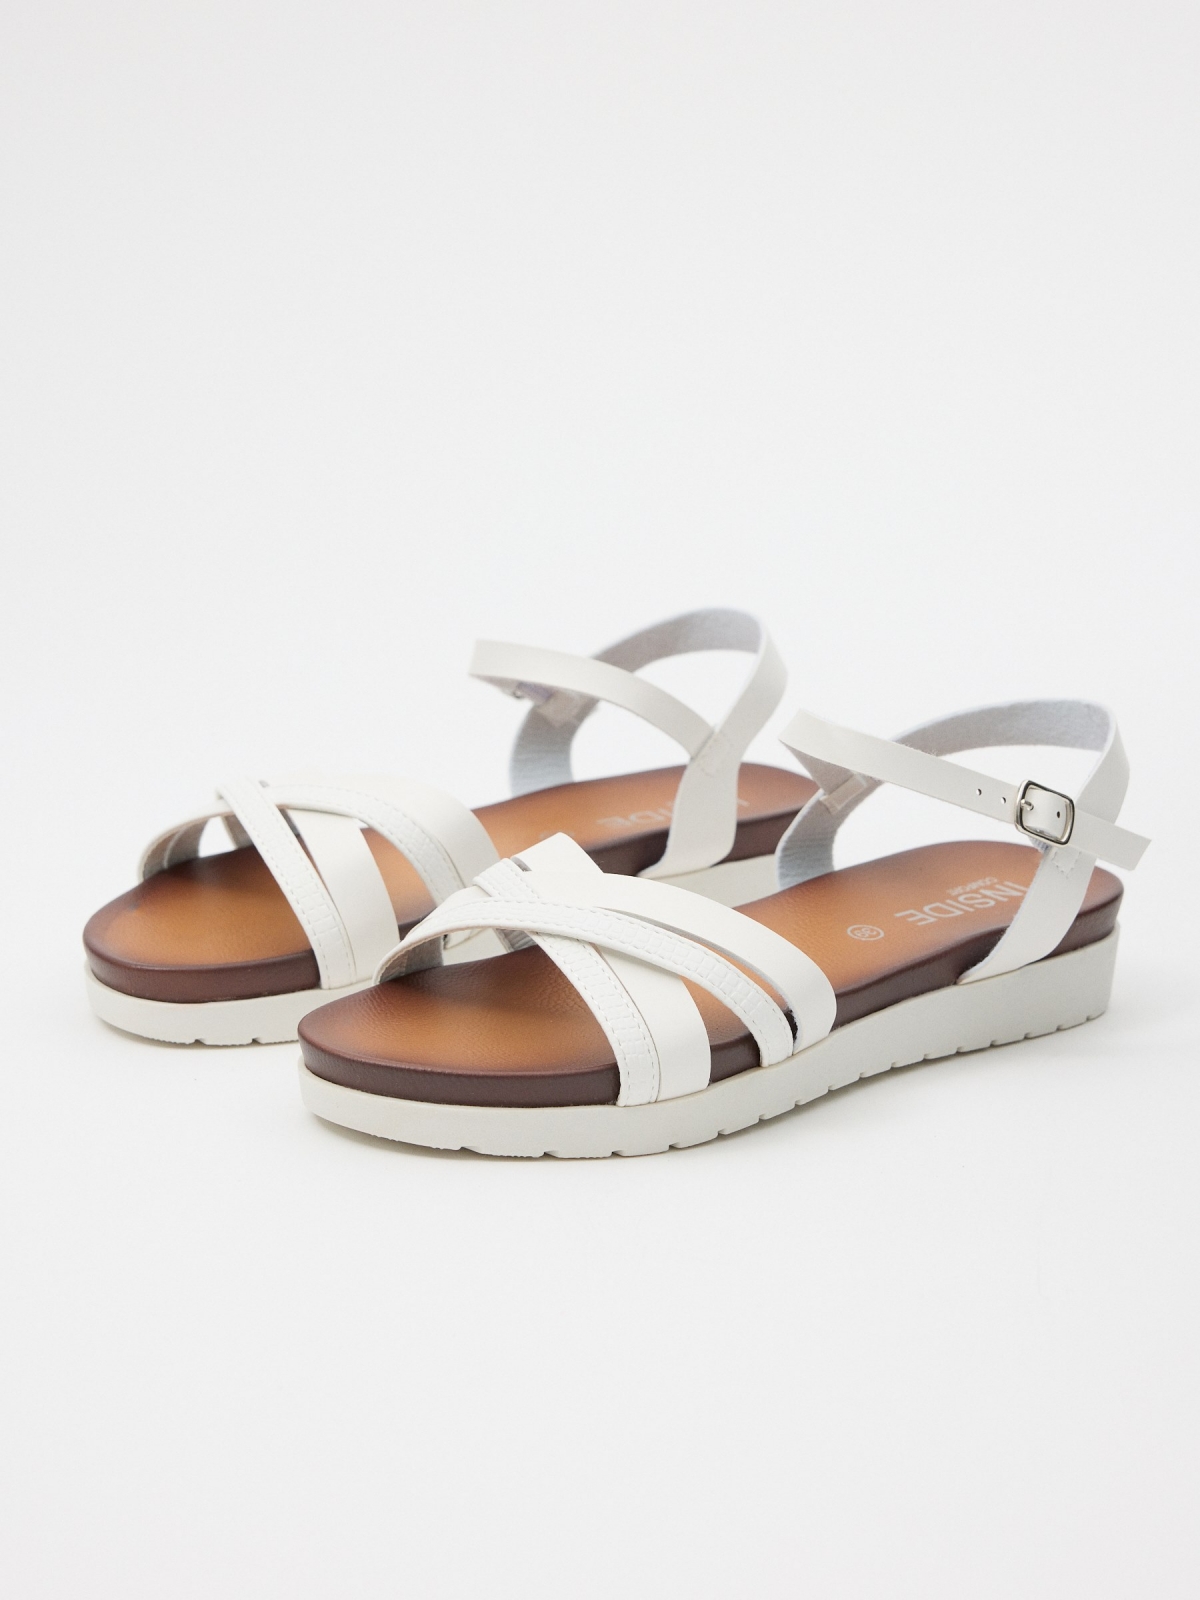 Sandals snake straps white 45º front view